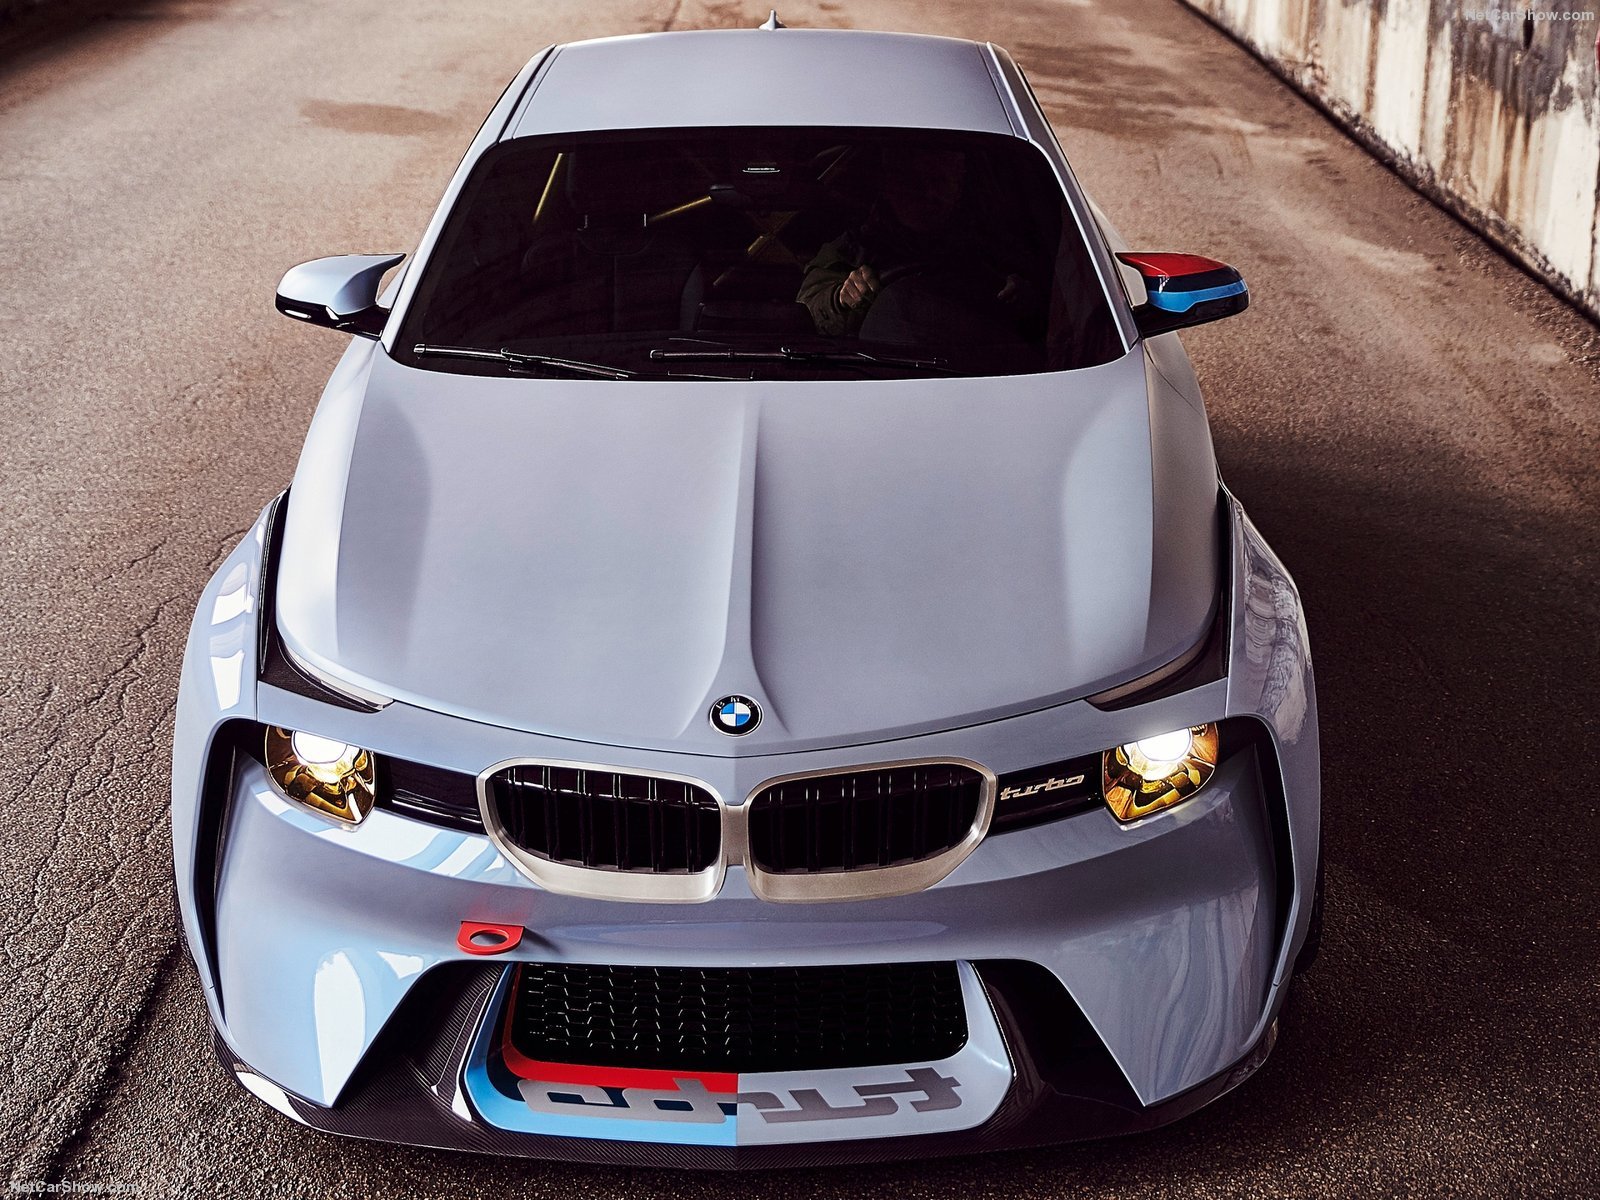 bmw, 2016, 20, 02hommage, Concept, Cars Wallpaper